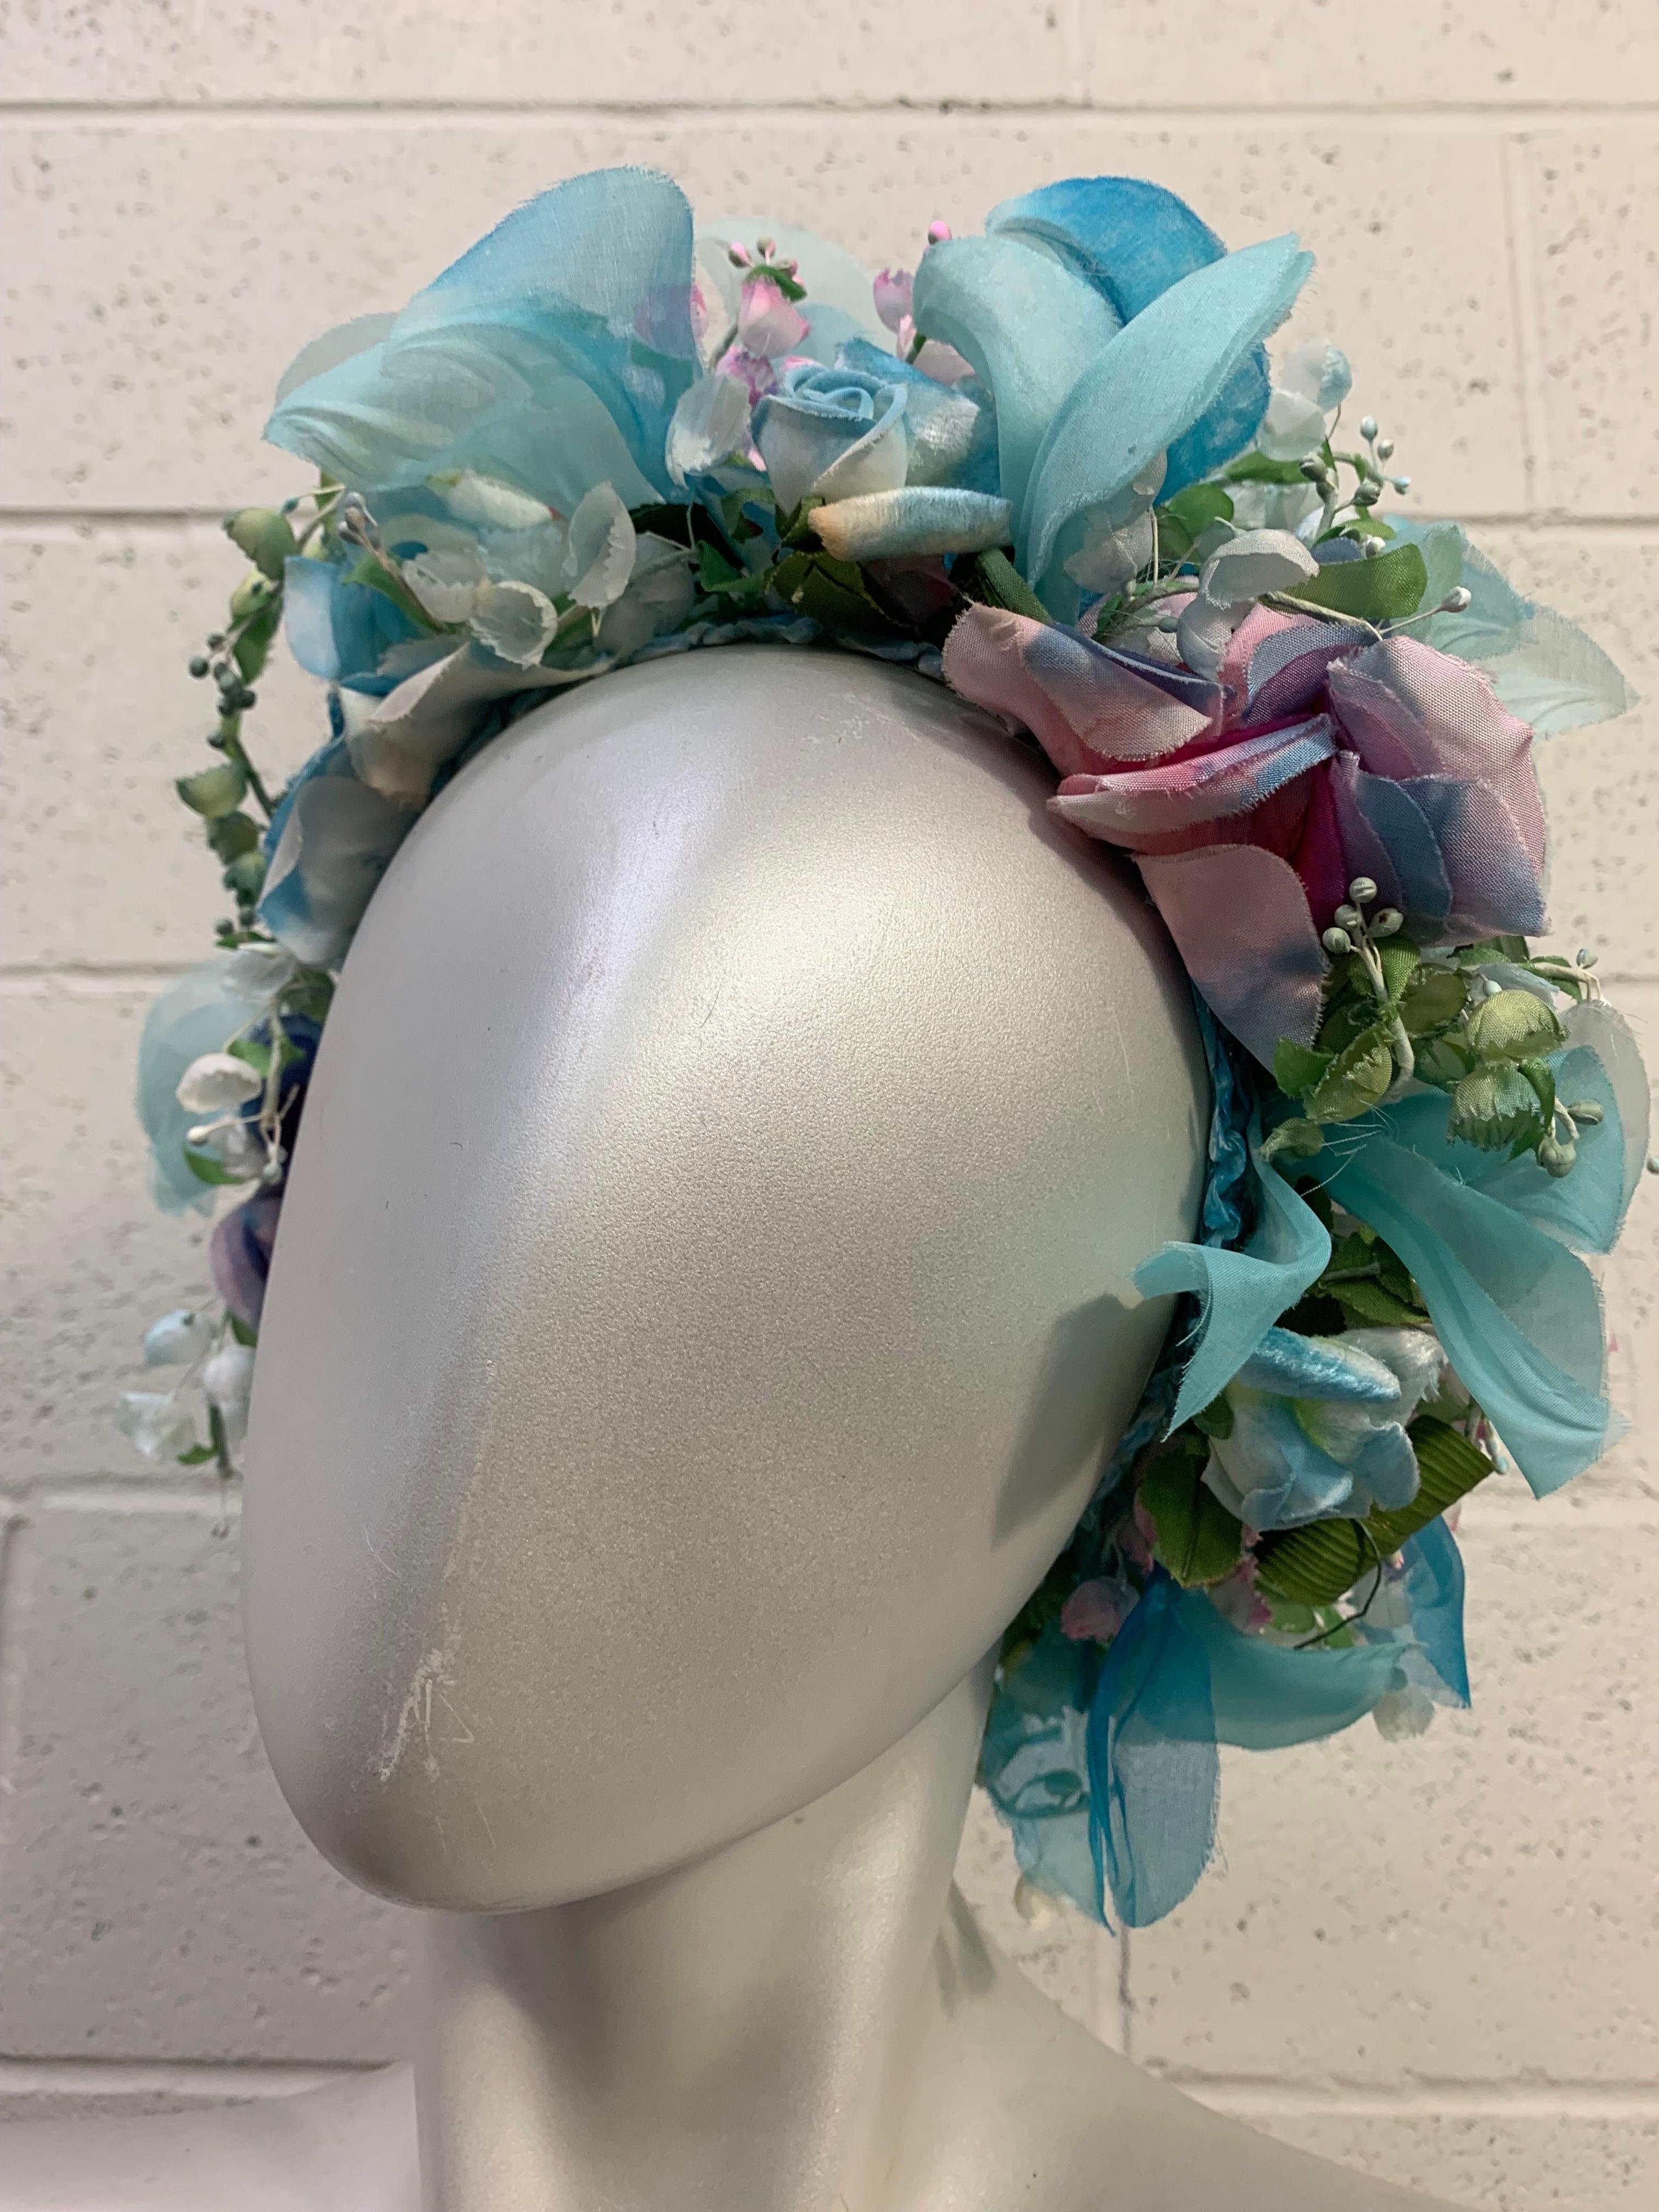 Women's 1960s Christian Dior Spectacular Floral Wreath / Turban Hat Turquoise & Purples For Sale